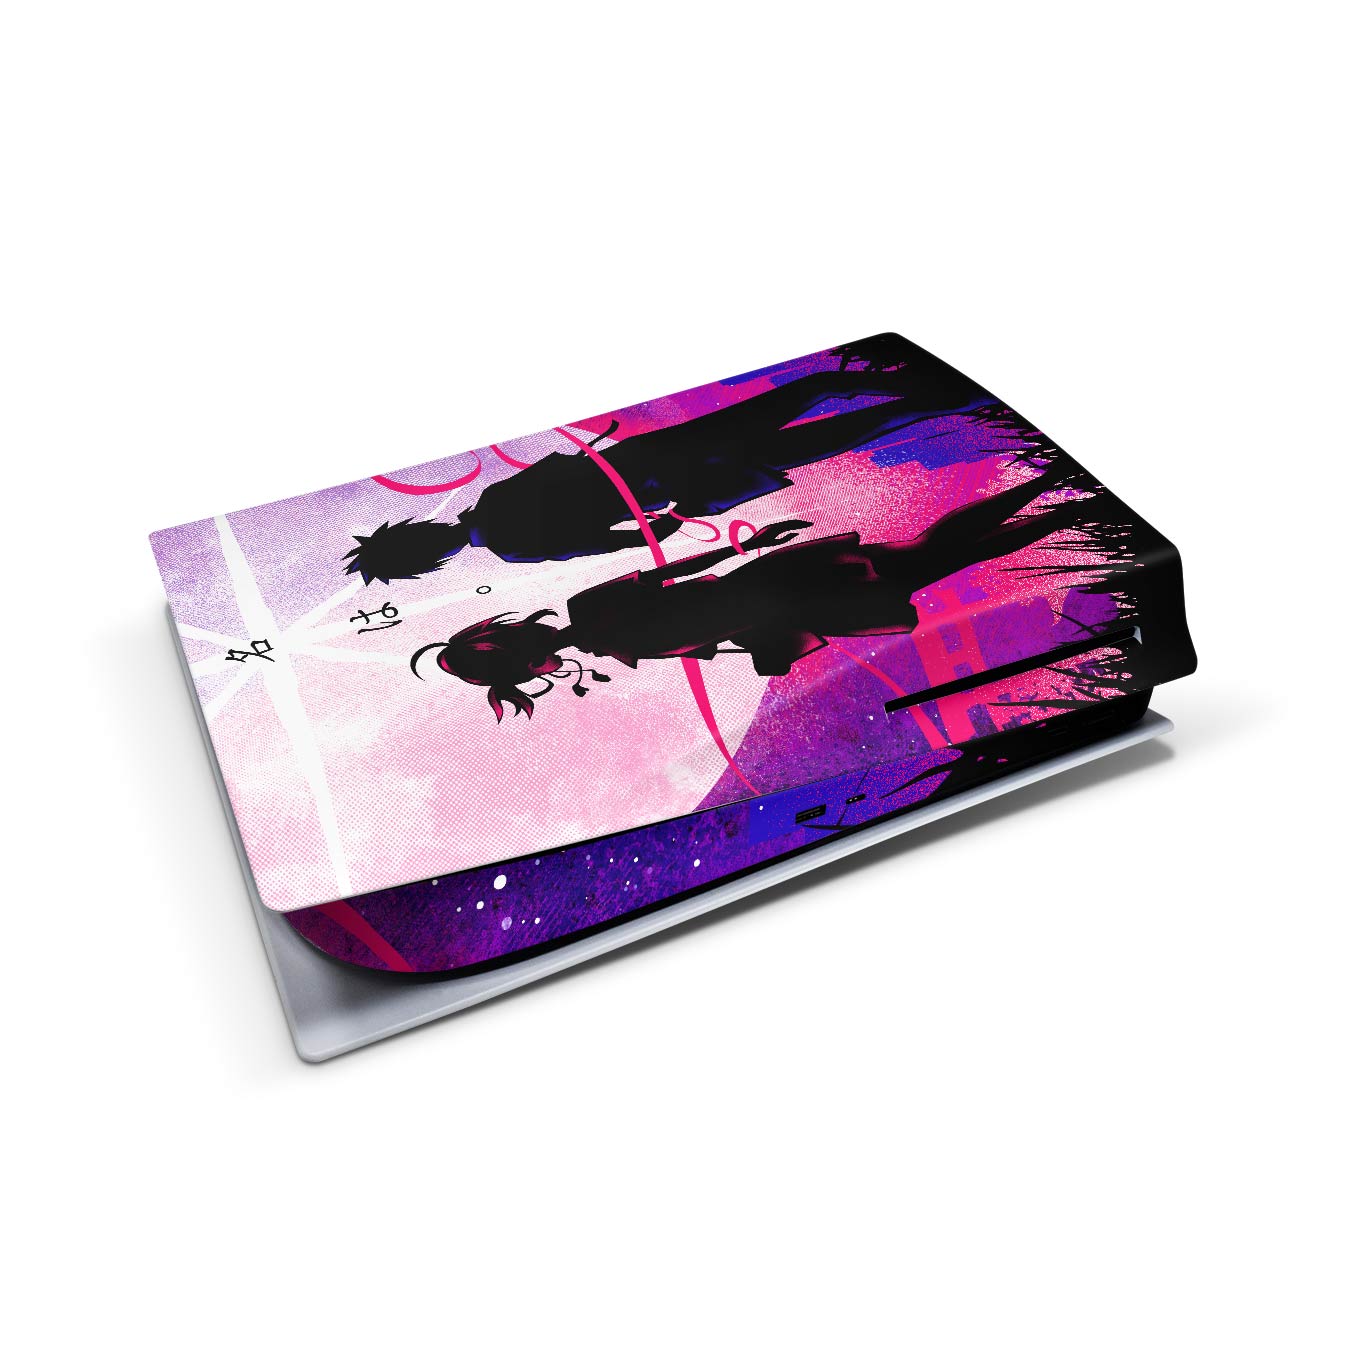 Your Name - PS5 Console Skin